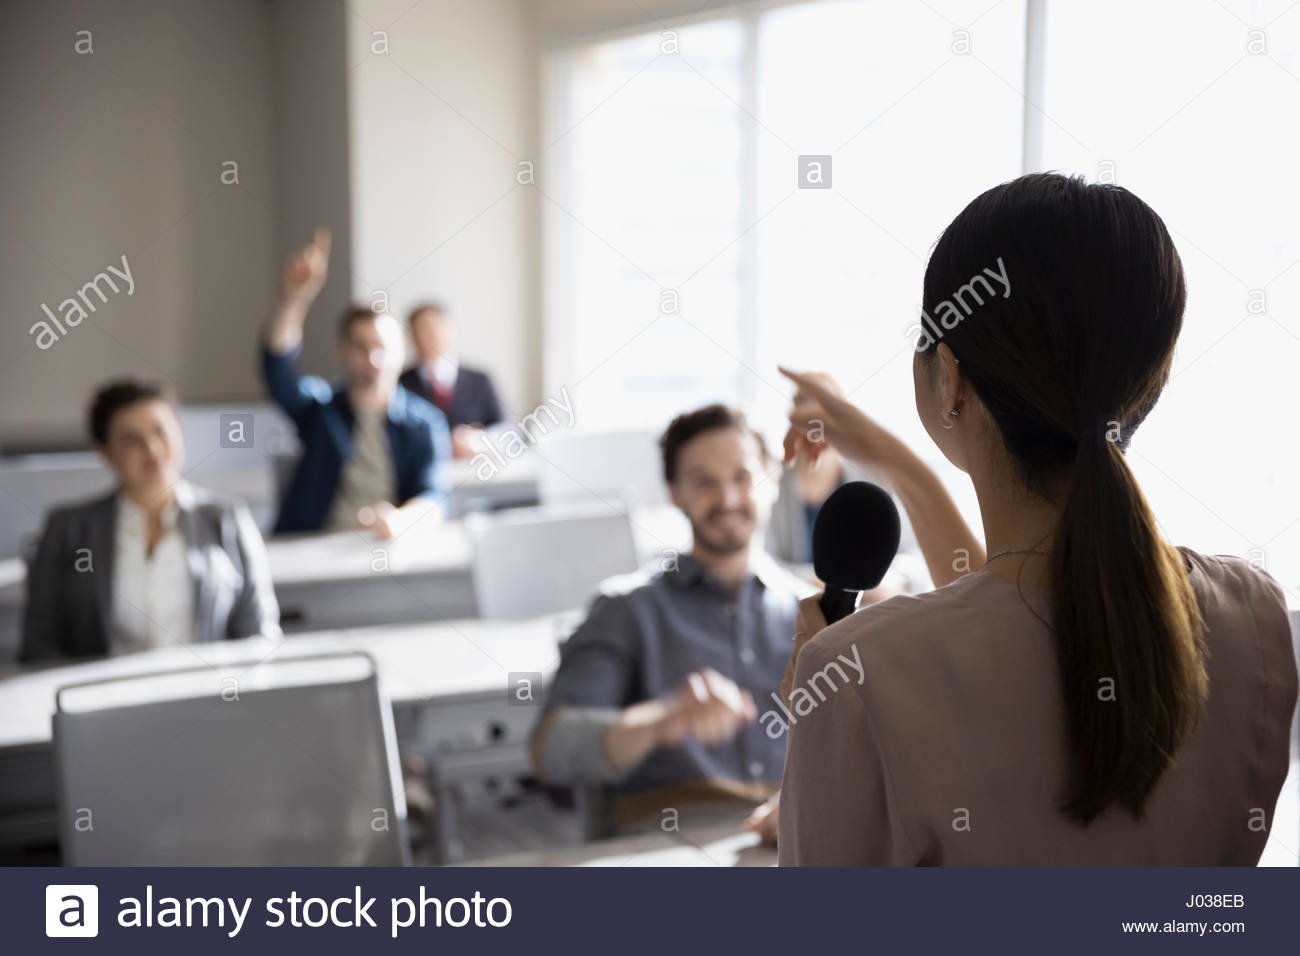 Businesswoman with microphone answering audience questions in office classroom Stock Photo